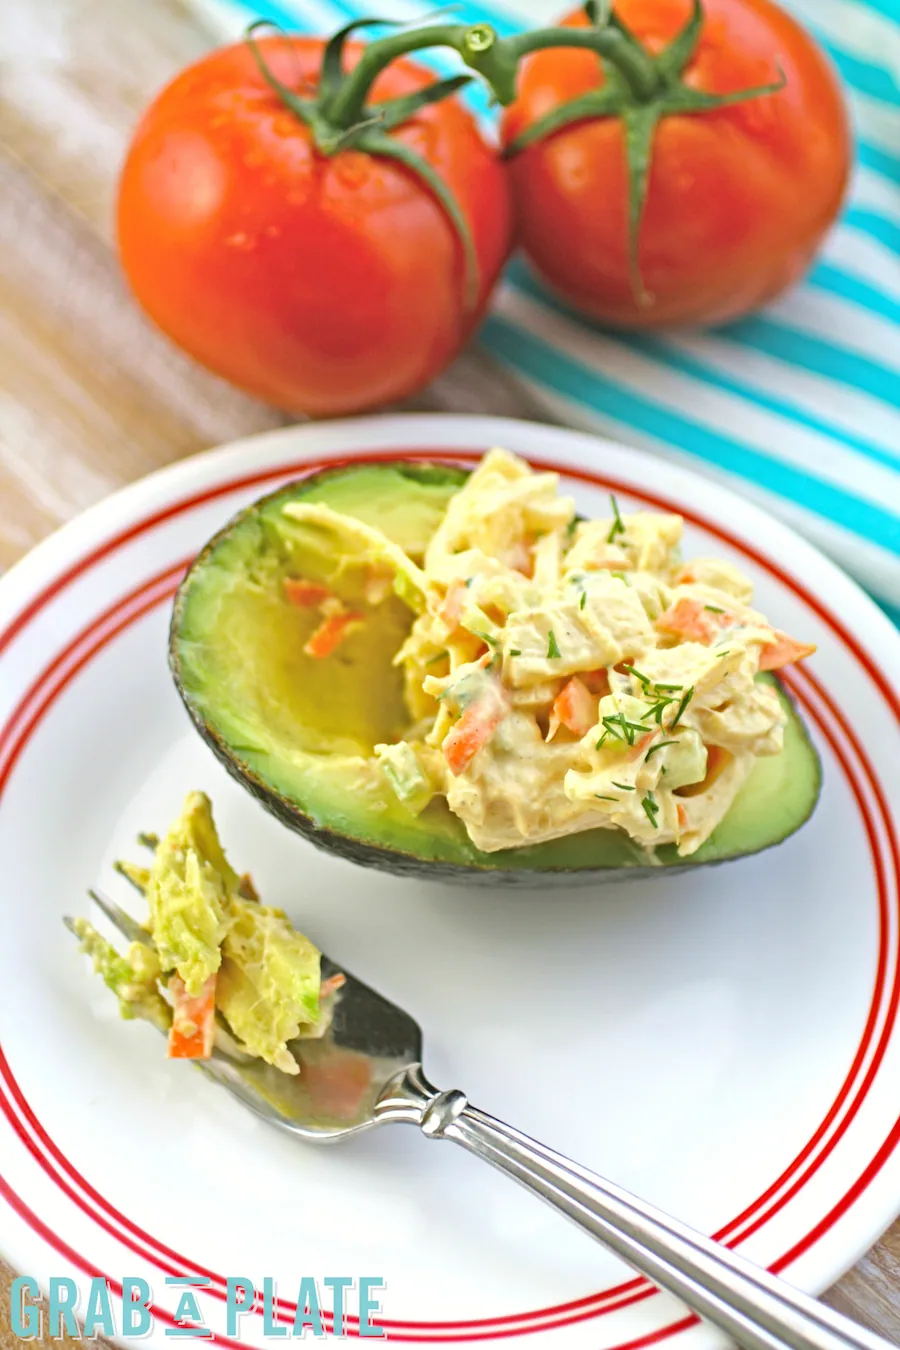 Forkful-avocado-hearts-of-palm-crabless-salad